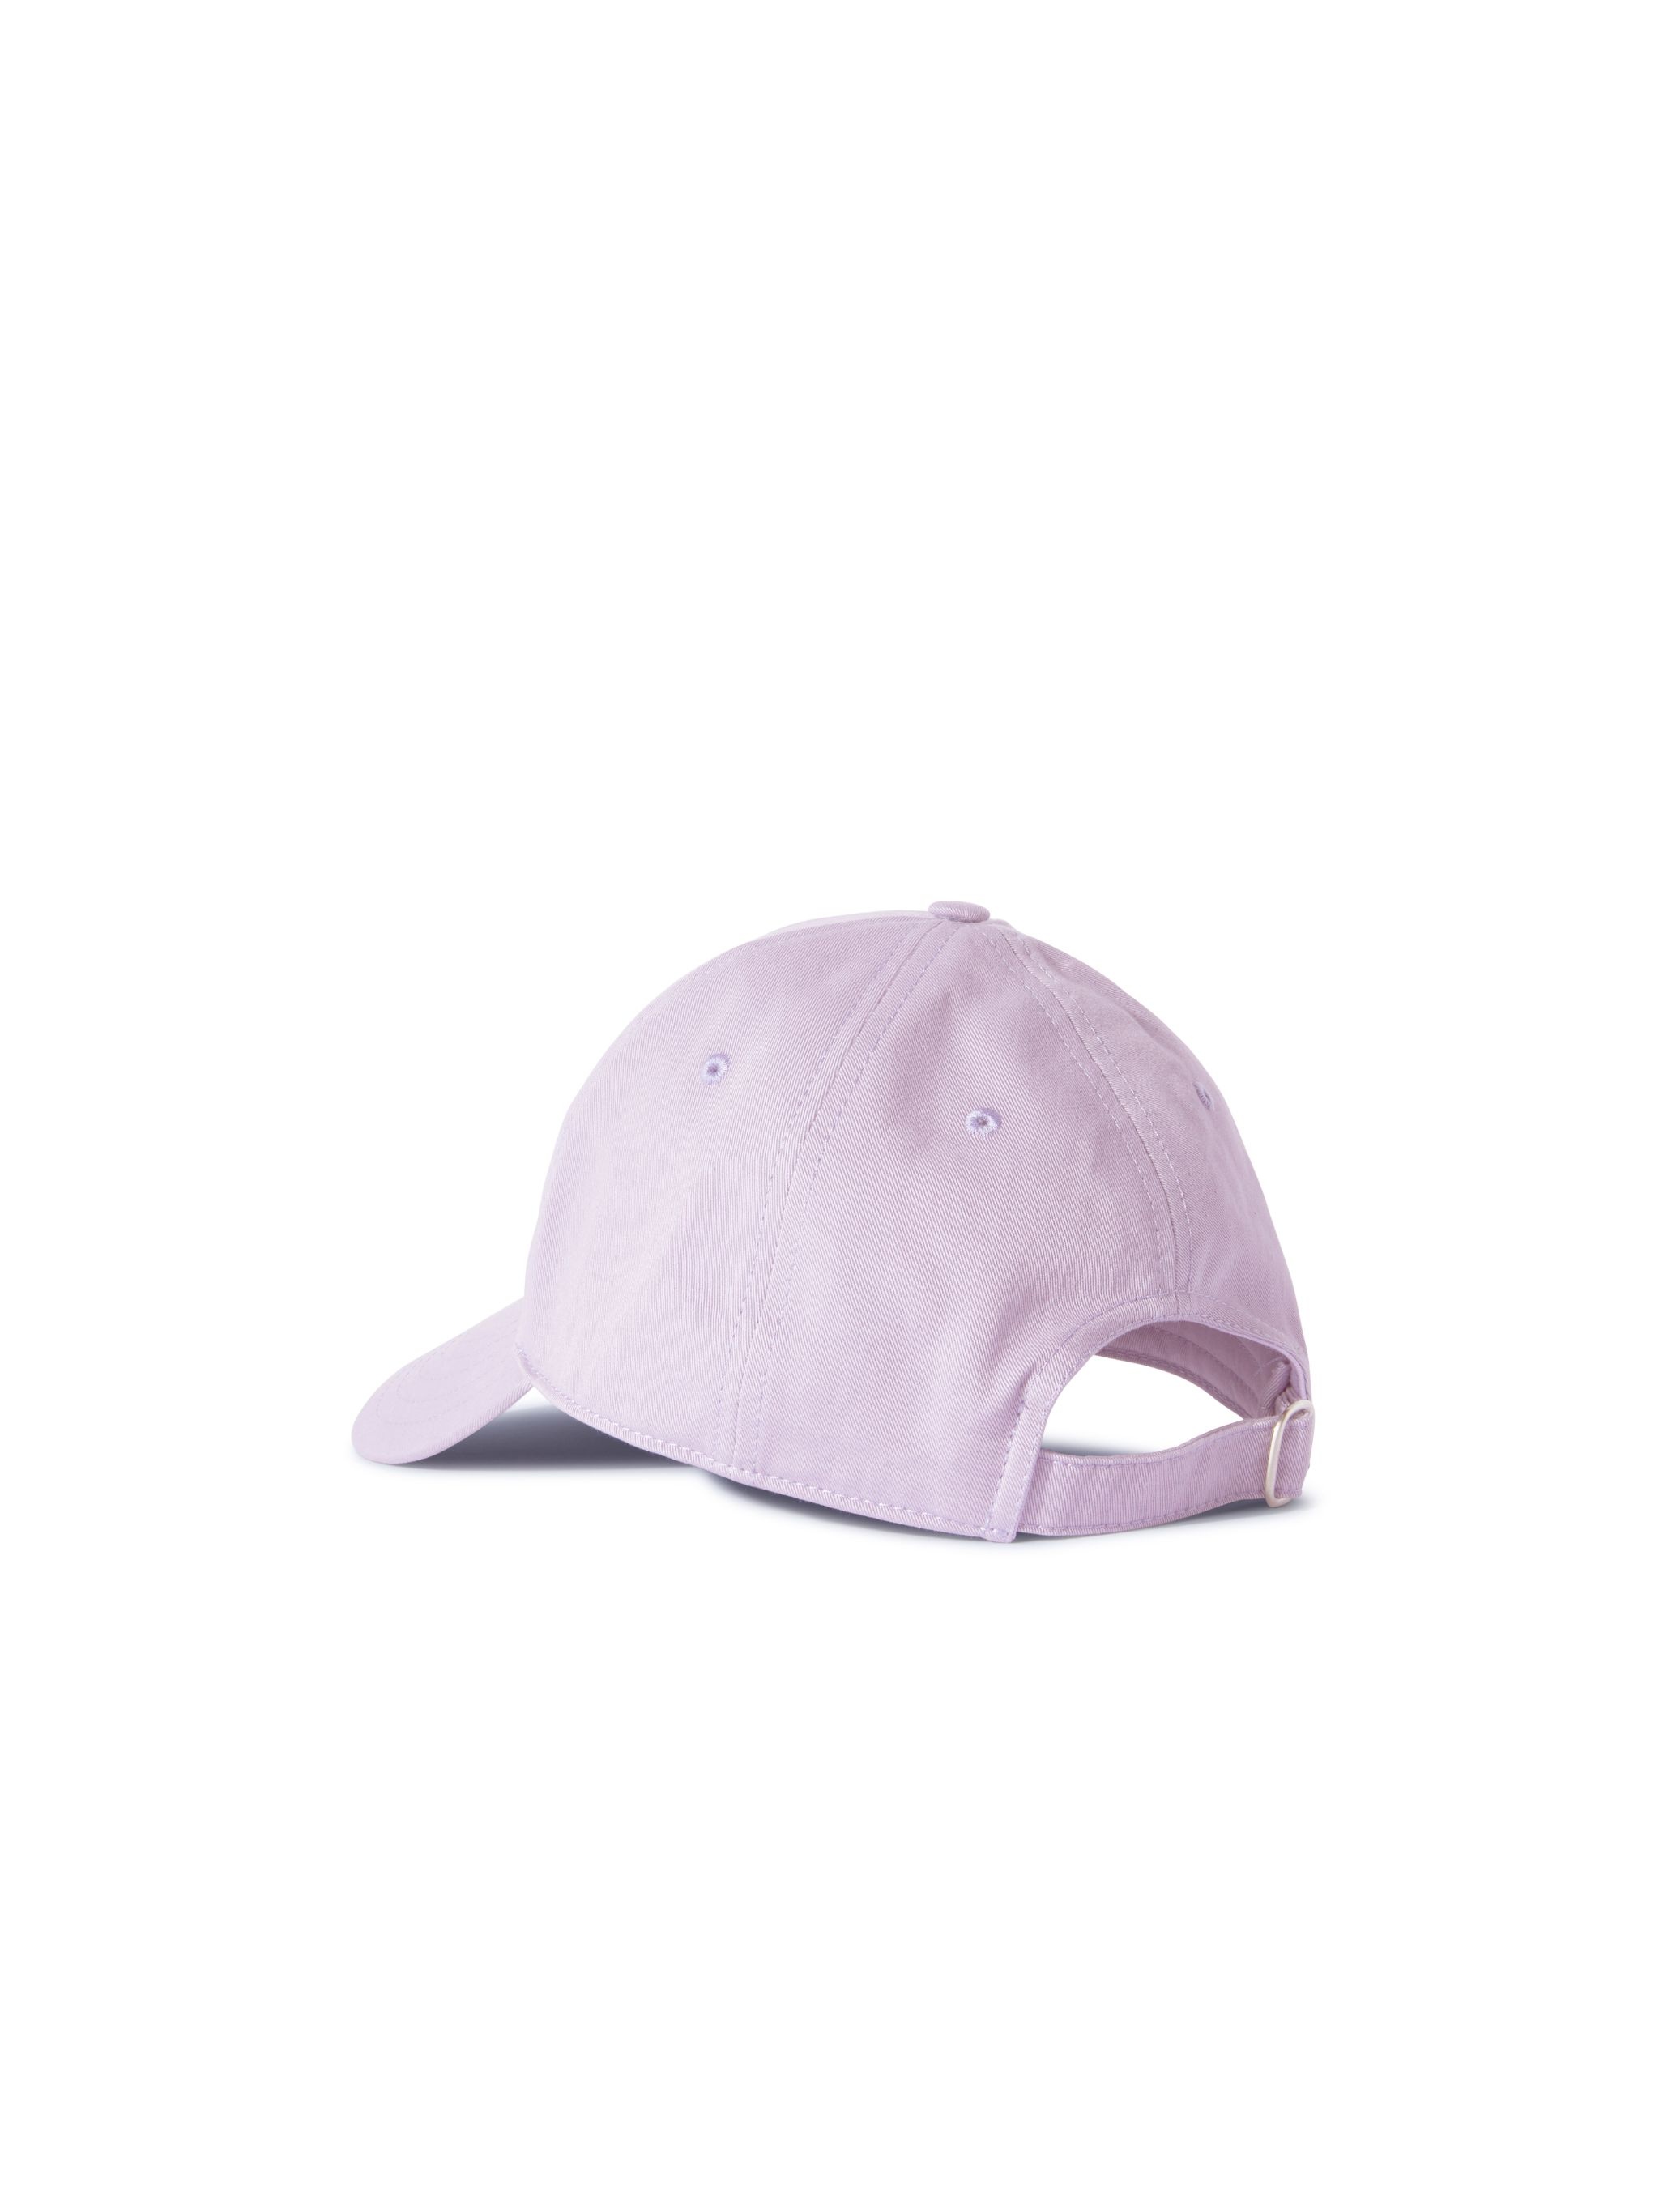 Drill Off Stamp Baseball Cap Lilac Whit - 2